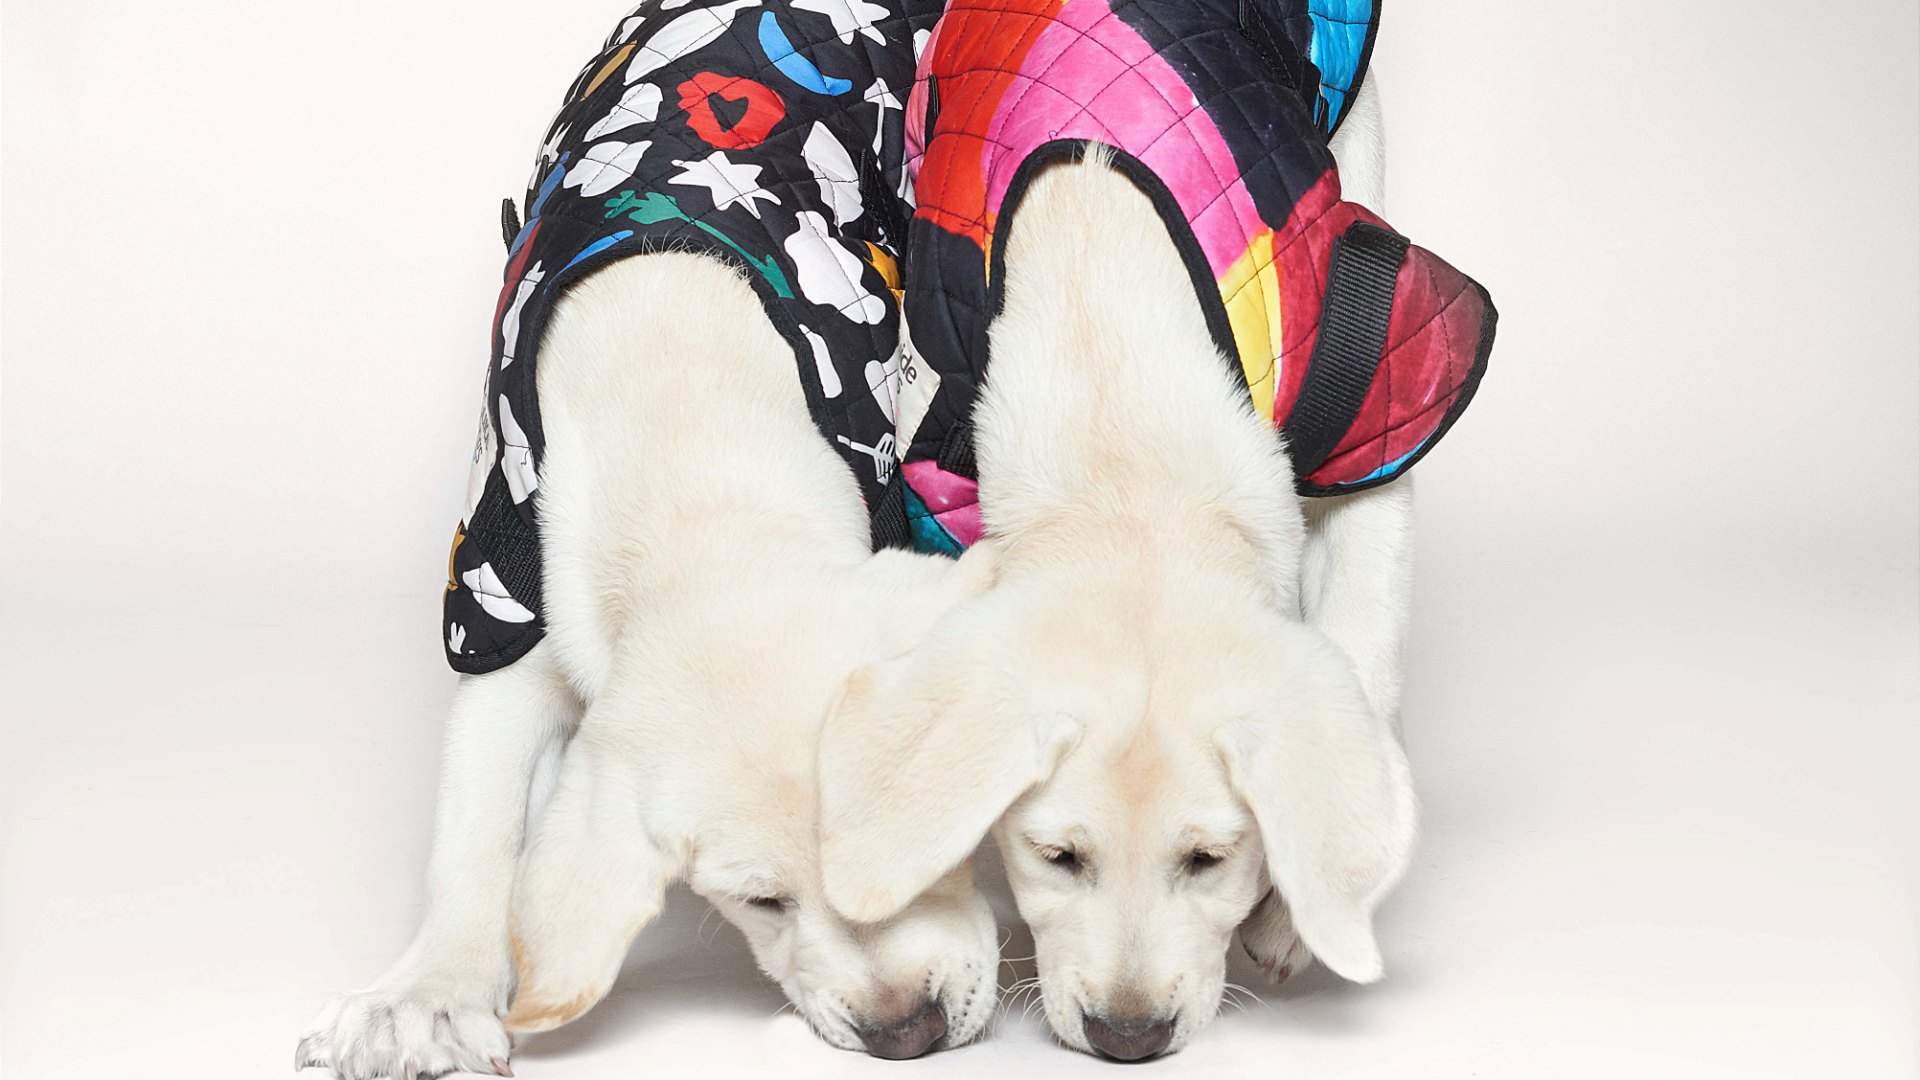 Elk and Gorman Have Just Launched a Charming New Winter Collection for Your Pup